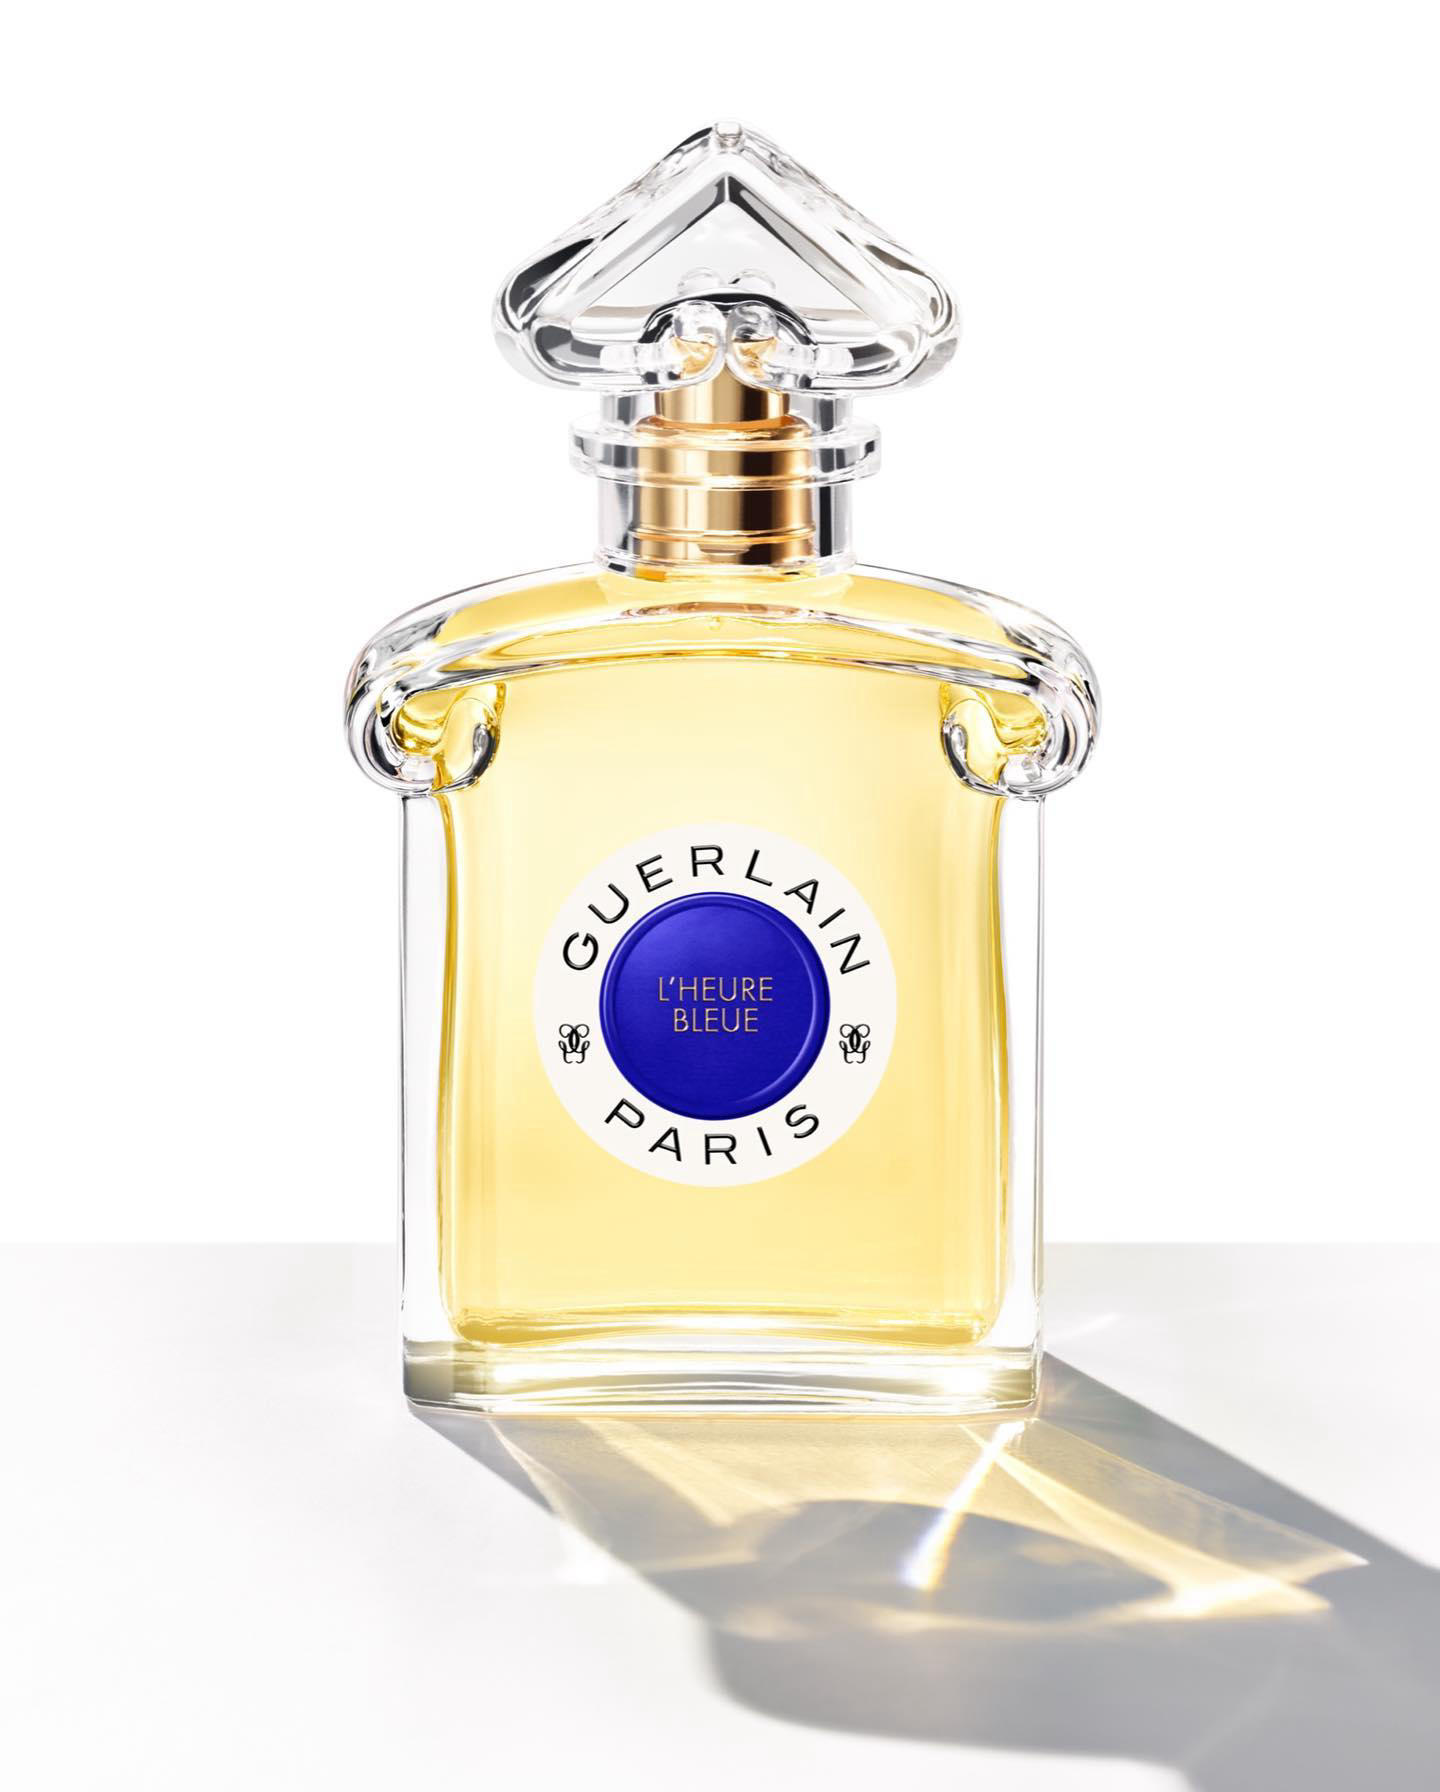 Guerlain - Imagined by Jacques Guerlain in 1912, L’Heure Bleue is the essence of suspended time, cel